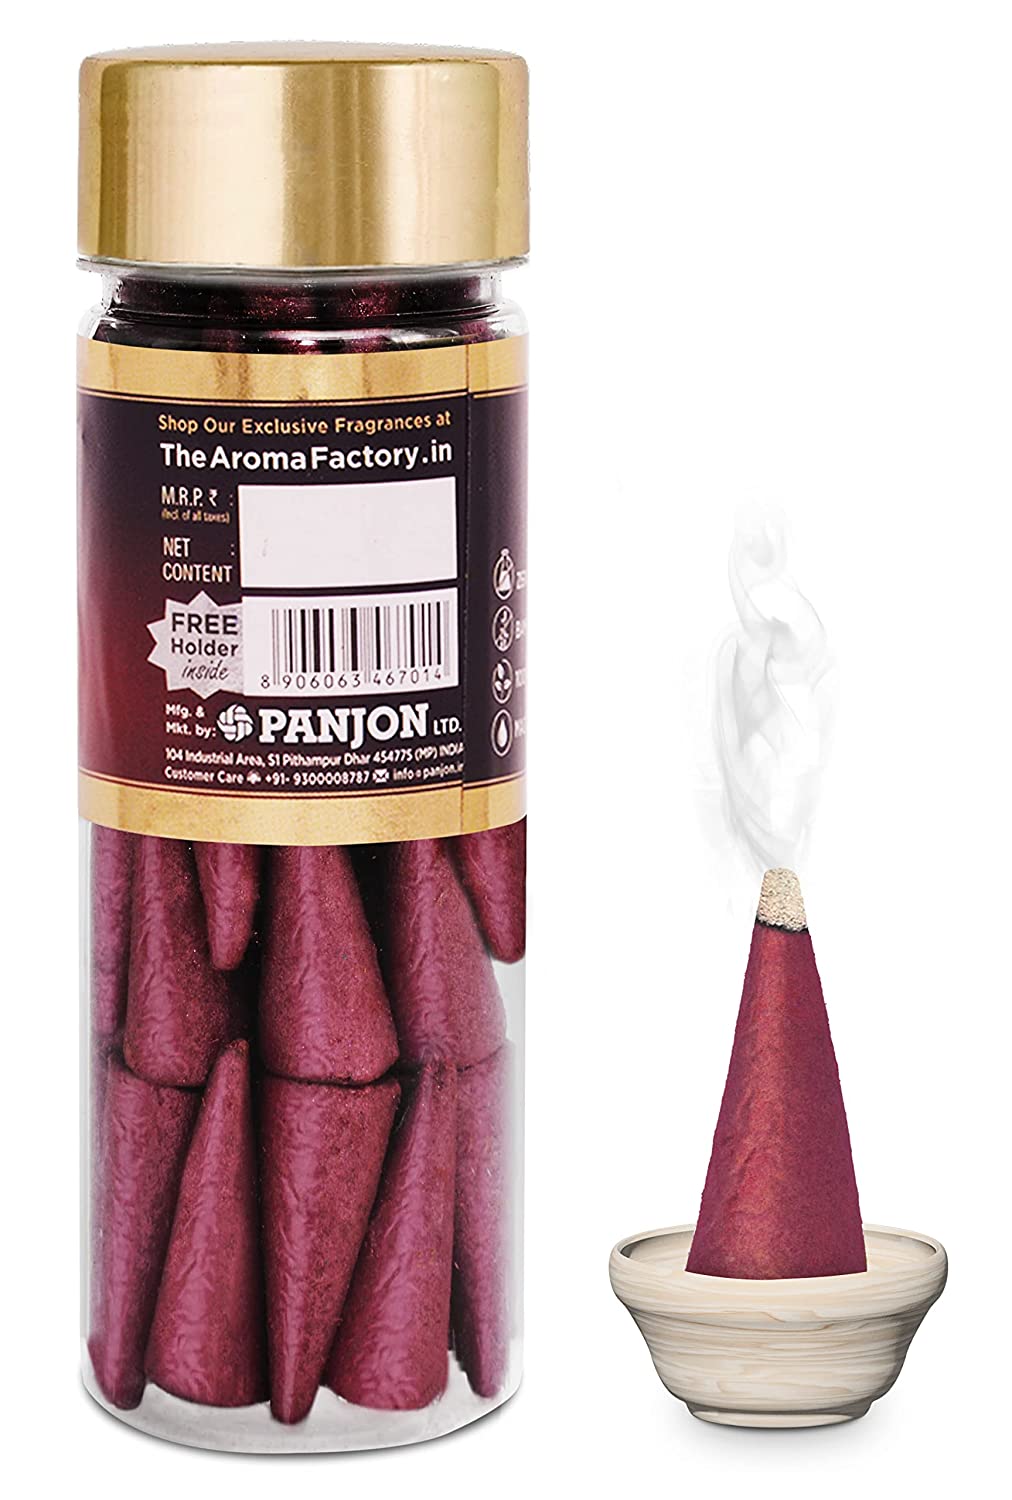 The Aroma Factory Incense Dhoop Cone for Pooja, Rose (100% Herbal & 0% Charcoal) 1 Bottle x 30 Cones